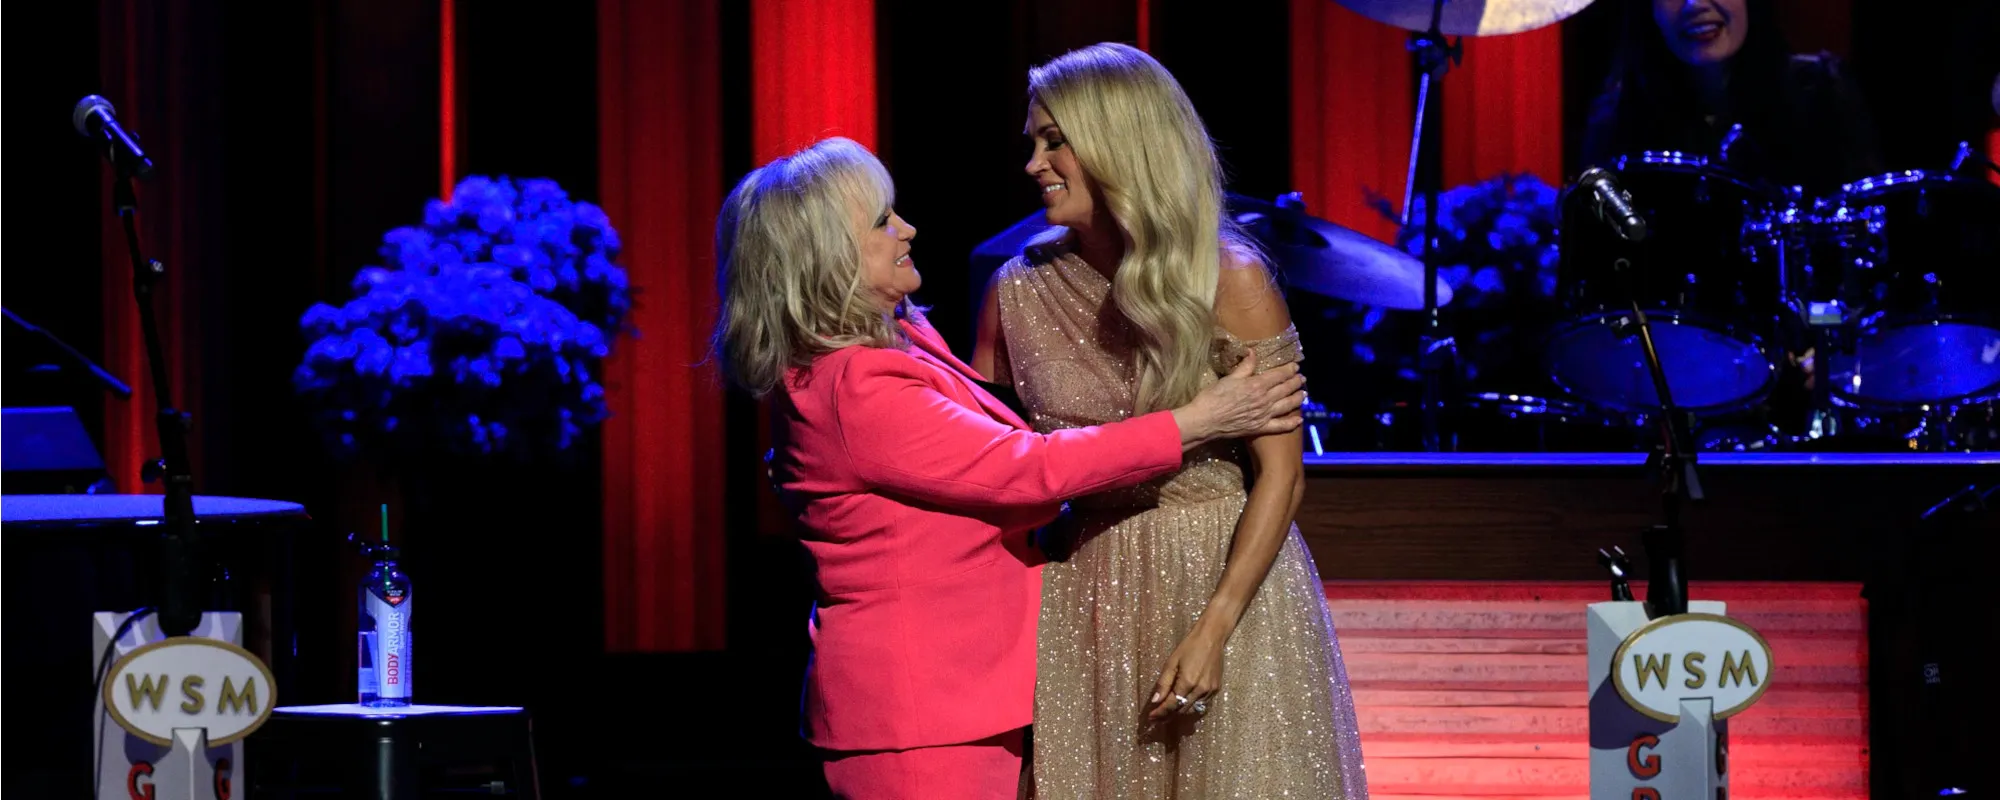 Barbara Mandrell Returns to Grand Ole Opry to Celebrate 50th Anniversary as Member